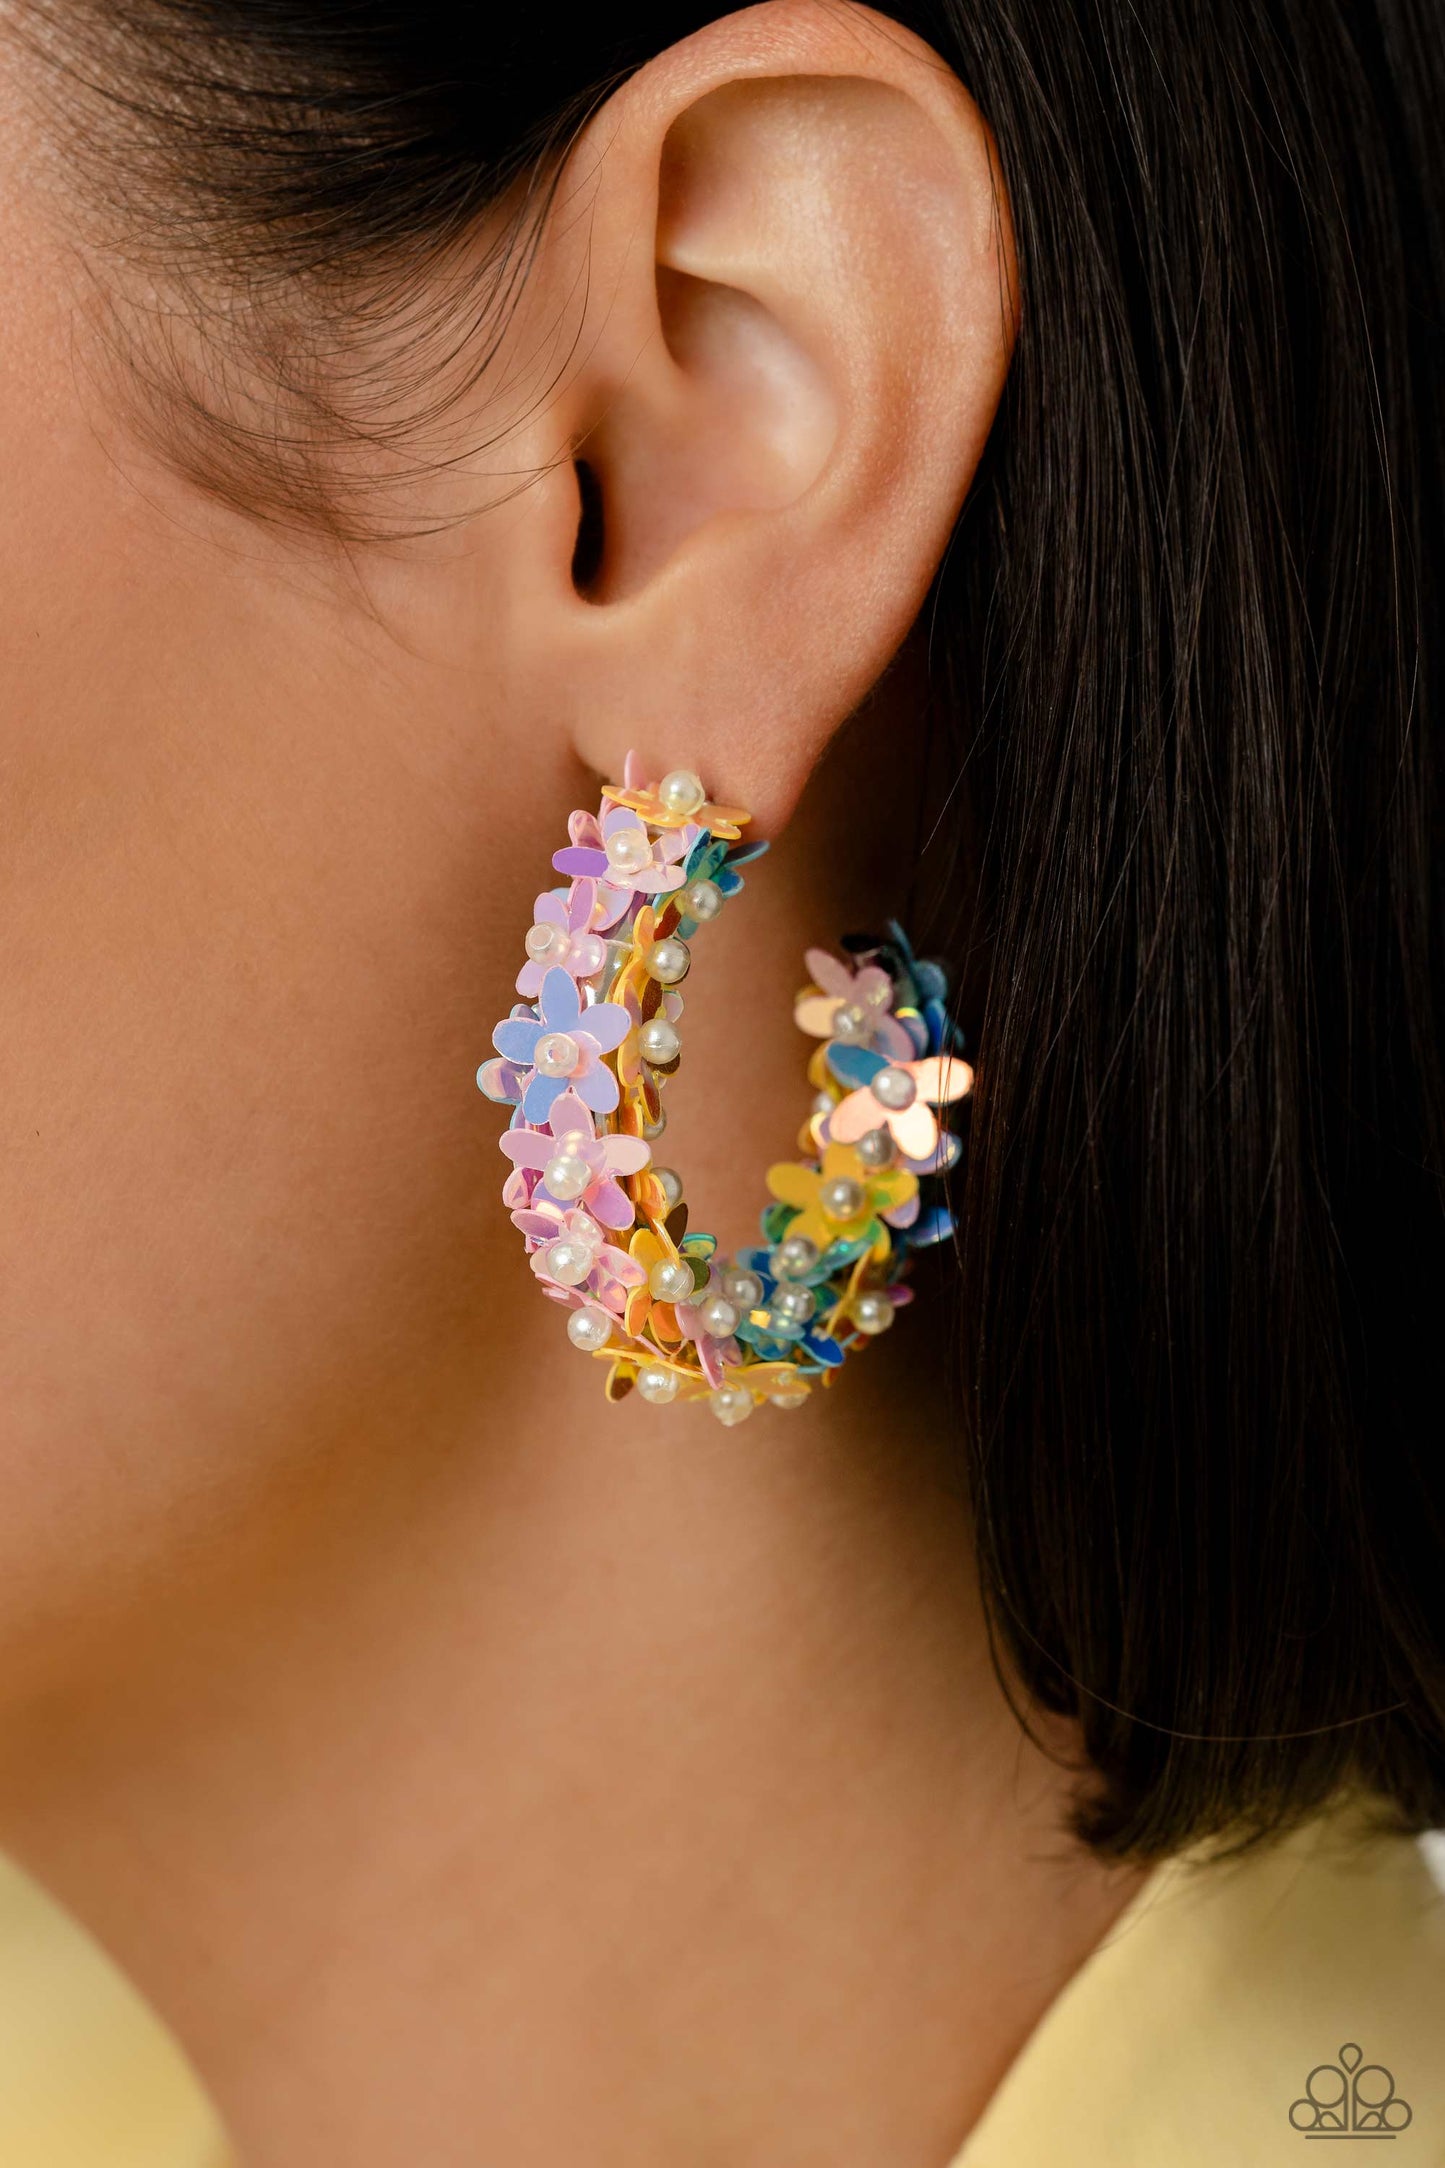 floral explosion, encompassing the entirety of a thick silver hoop, features reflective light blue, pink, and yellow flowers dotted with dainty pearl centers for a dreamy, whimsicality below the ear. Earring attaches to a standard post fitting. Hoop measures approximately 1 1/2" in diameter.  Sold as one pair of hoop earrings.